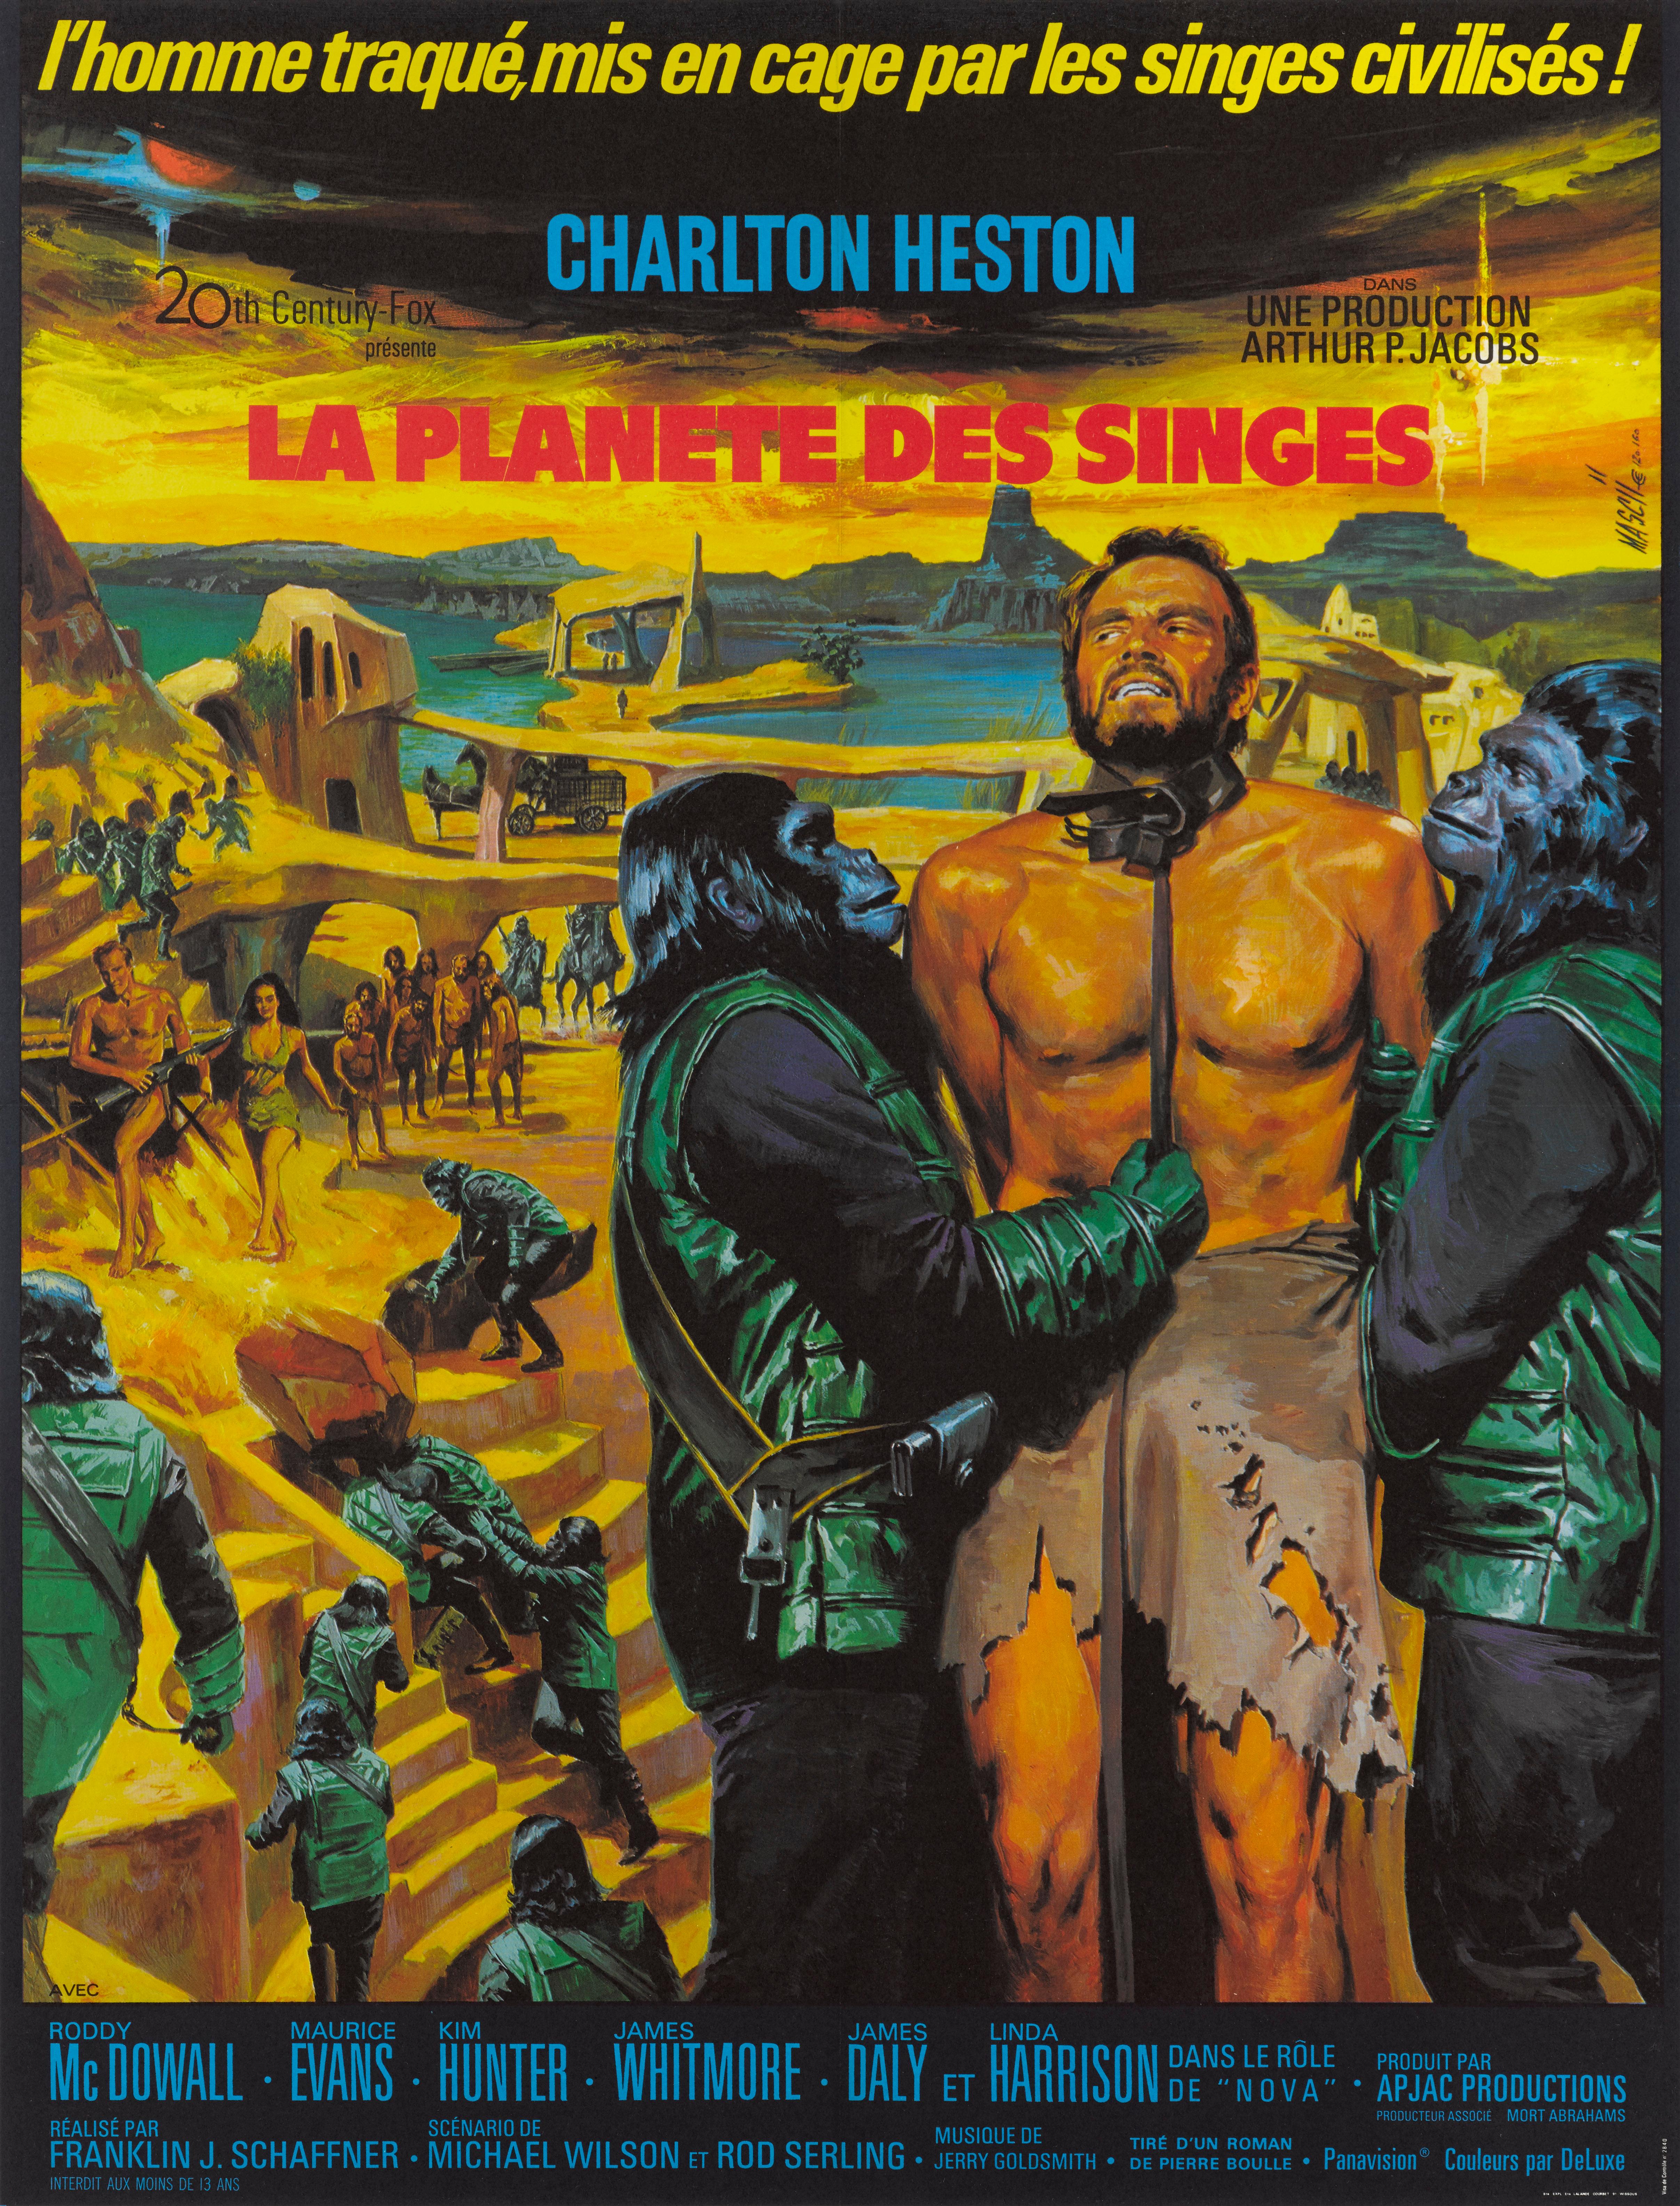 Original French film poster for the first Planet of the Apes movie in 1968.
The artwork on this poster is unique to the films French release and was designed by Jean Mascii (1926-2003) one of Frances best known poster artists. This cult sci-fi film